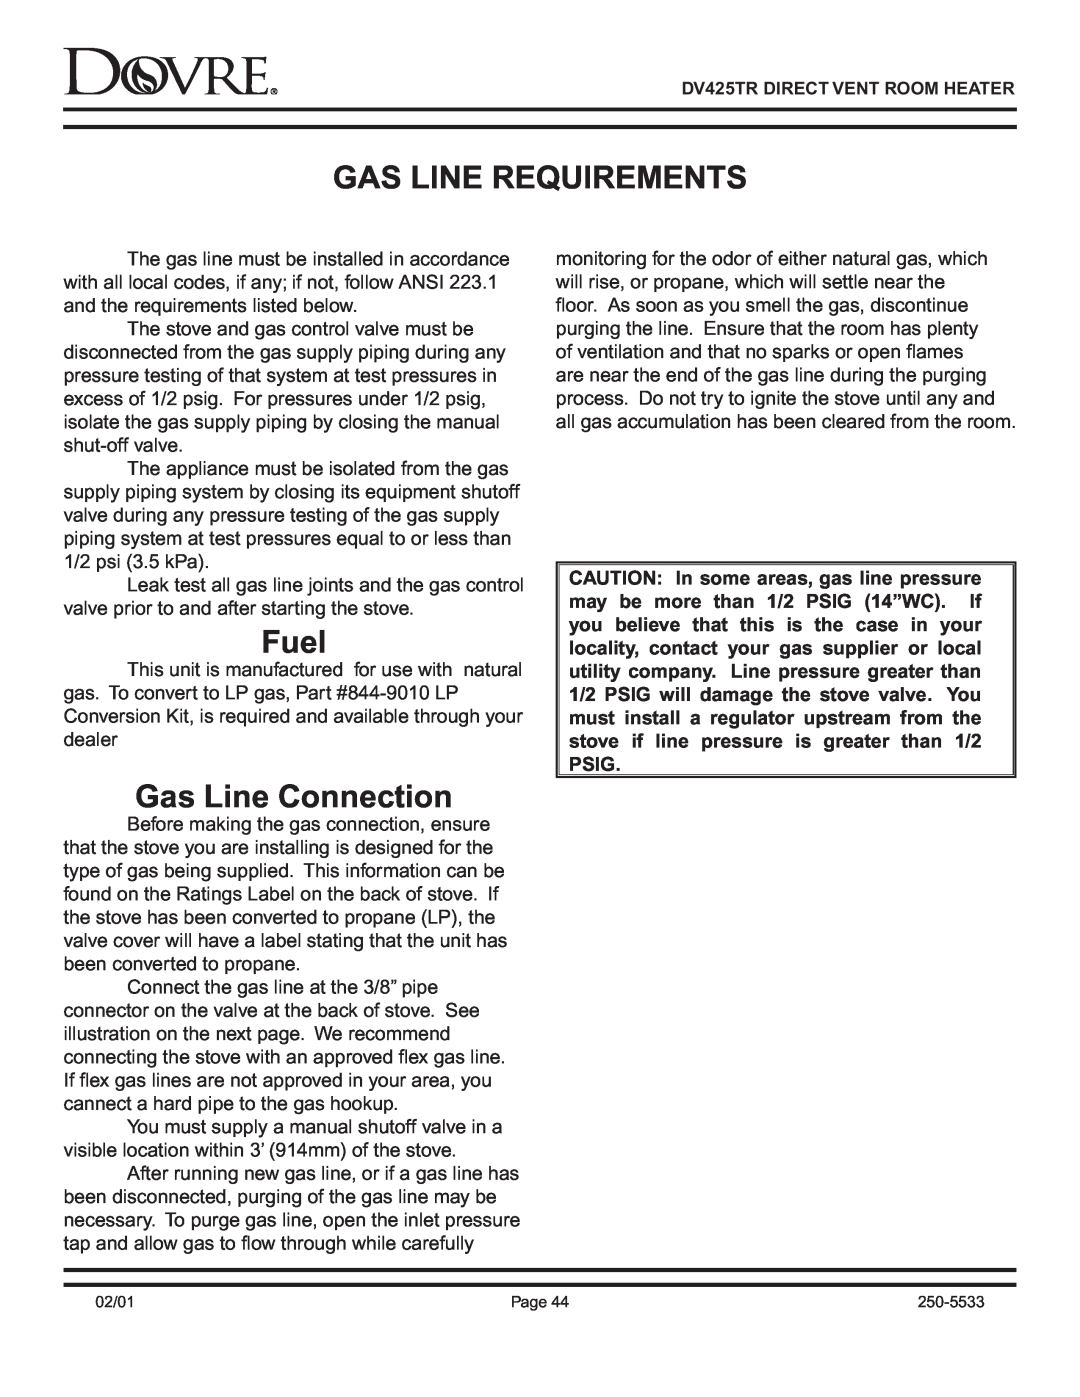 Sapphire Audio DV425TR owner manual Gas Line Requirements, Fuel, Gas Line Connection 